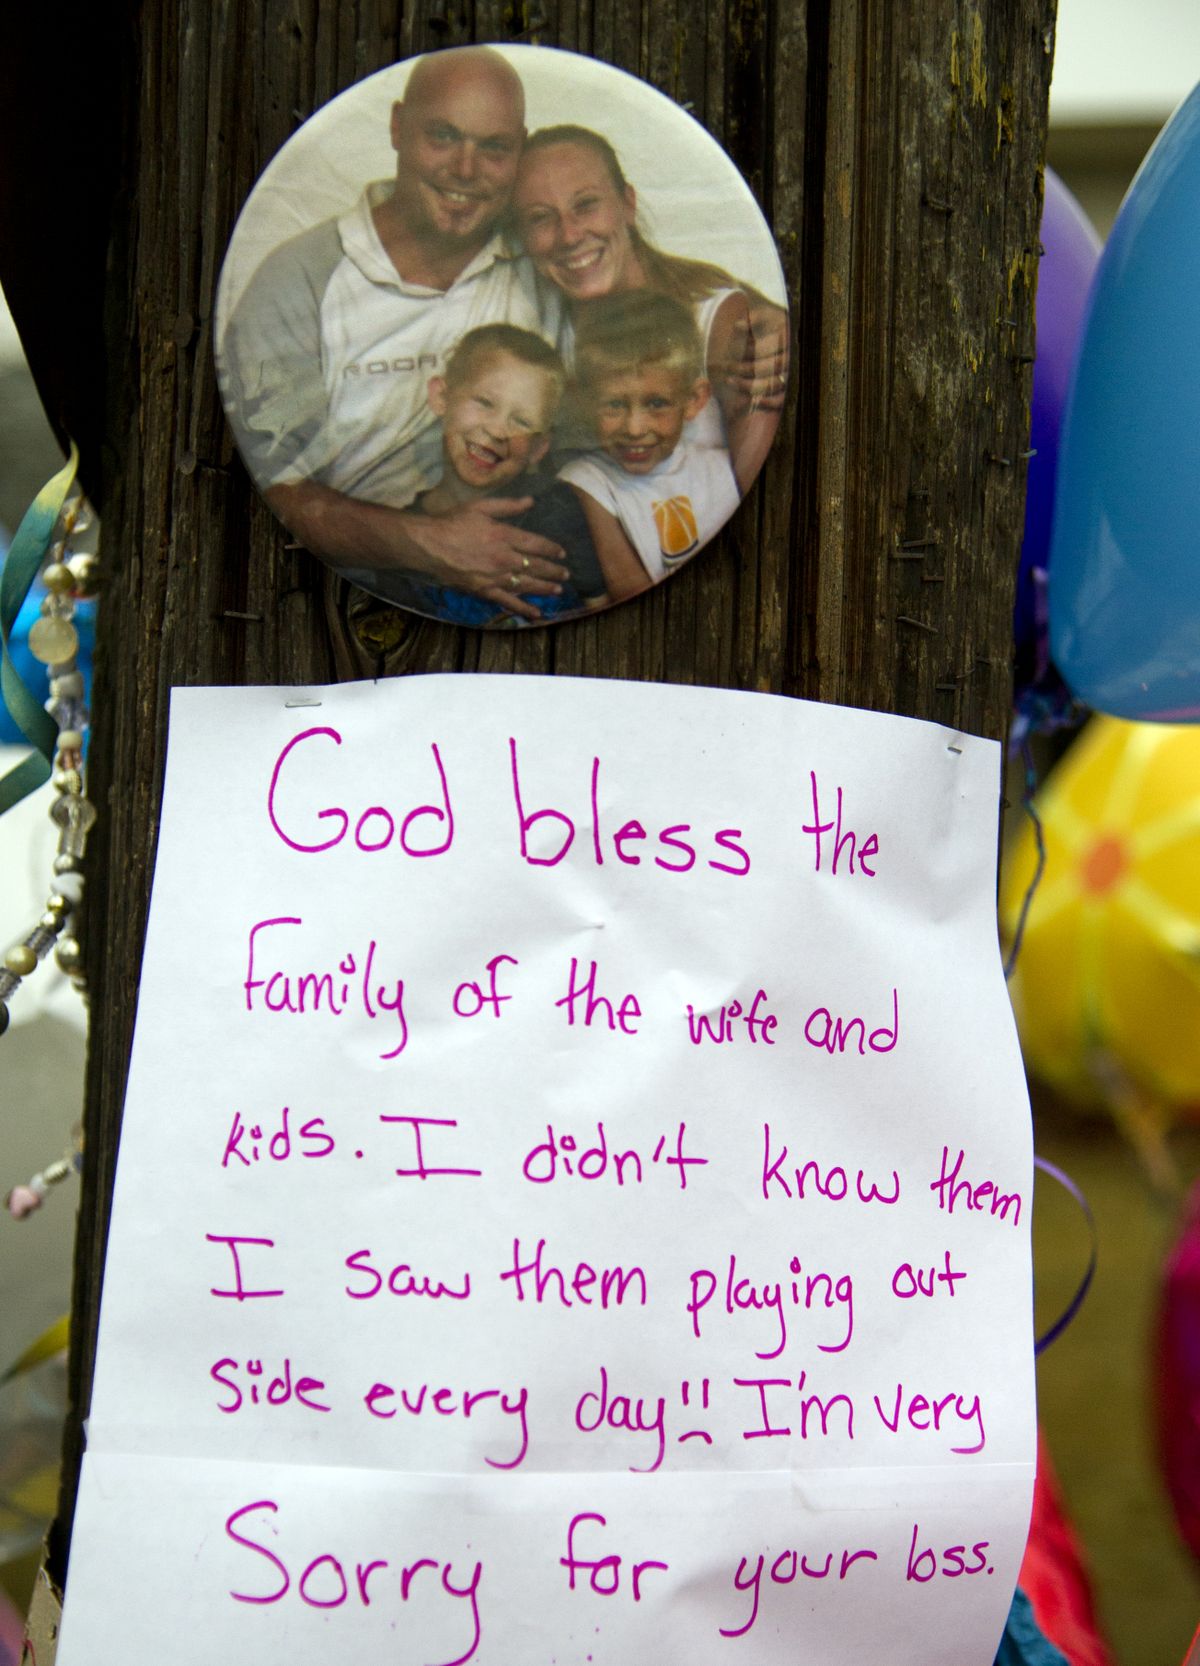 A photo of Nick Ader, his wife Tracy and their two sons is the centerpiece to a growing memorial to the murdered members of the family at the intersection of Heroy Avenue and Whitehouse Street. (Colin Mulvany / The Spokesman-Review)